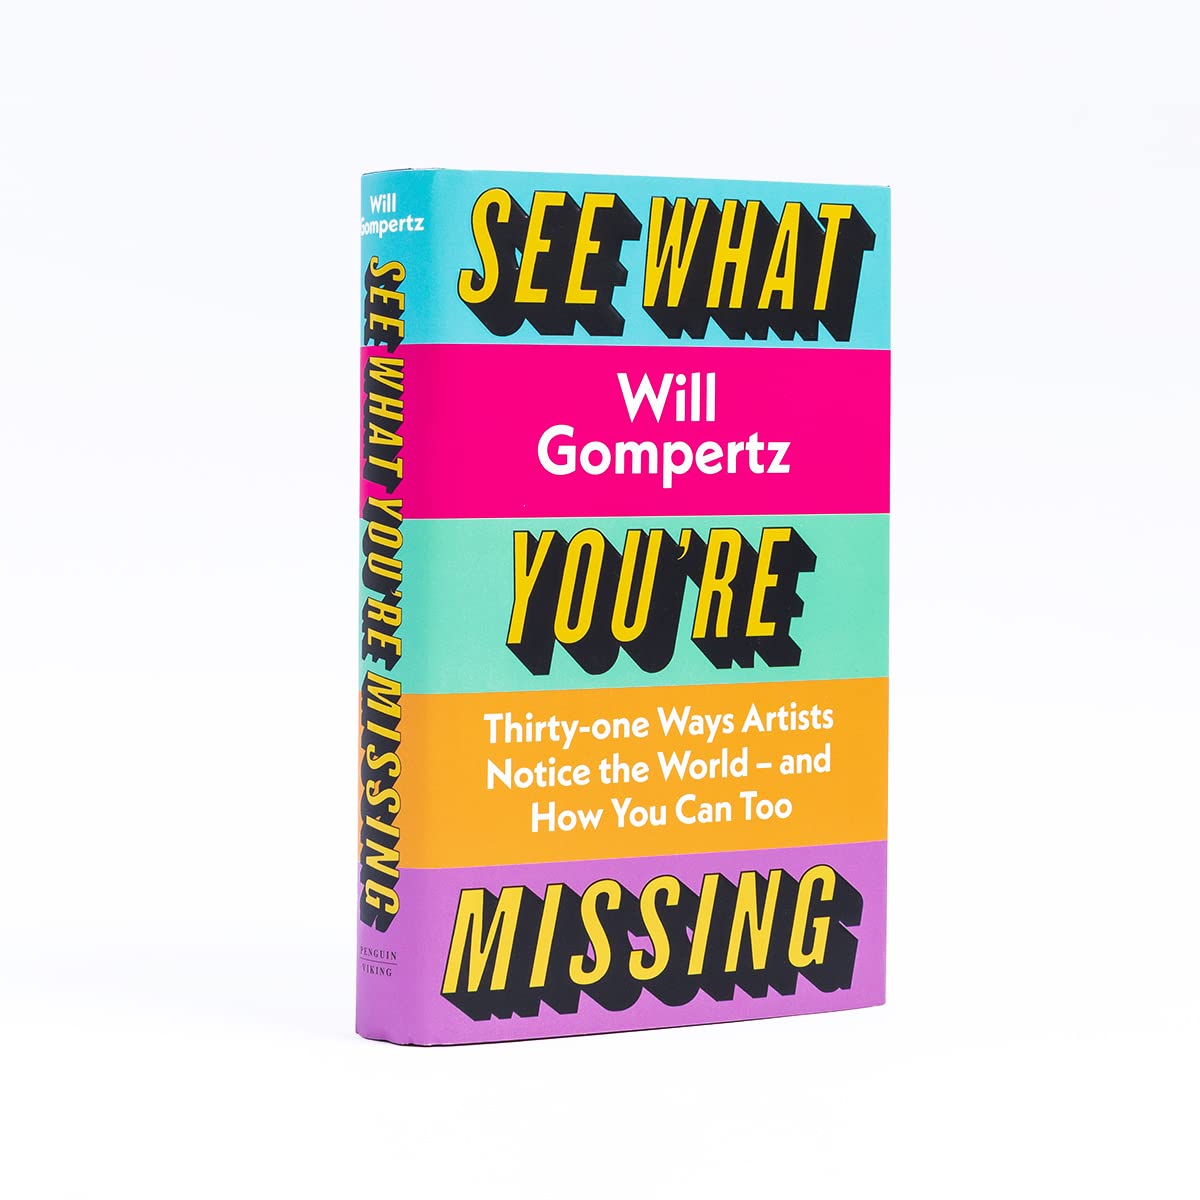 See What You're Missing  by Will Gompertz